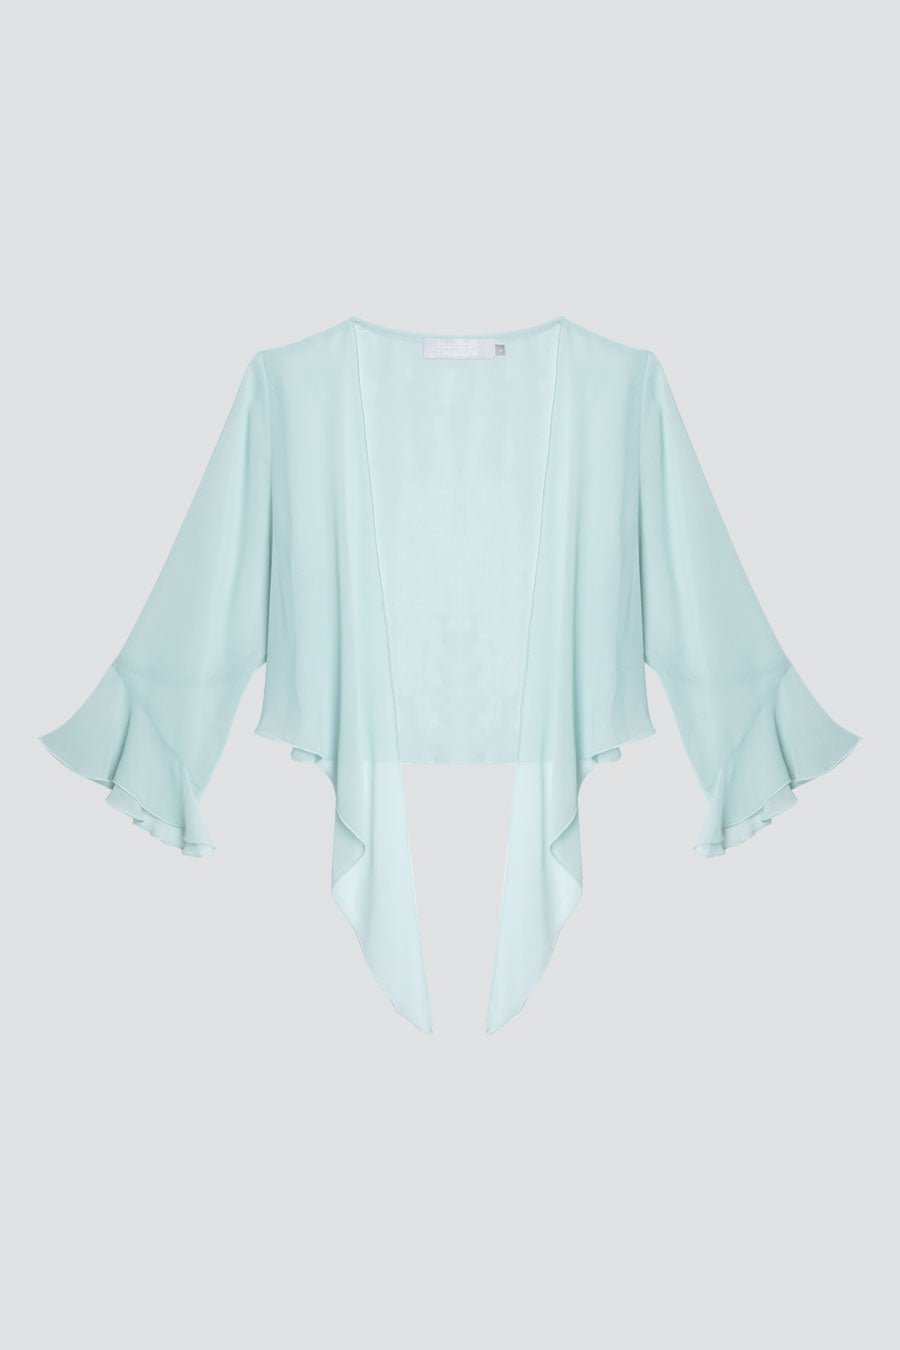 Long Sleeve Chiffon Cover Up - Misty Green - Maids to Measure